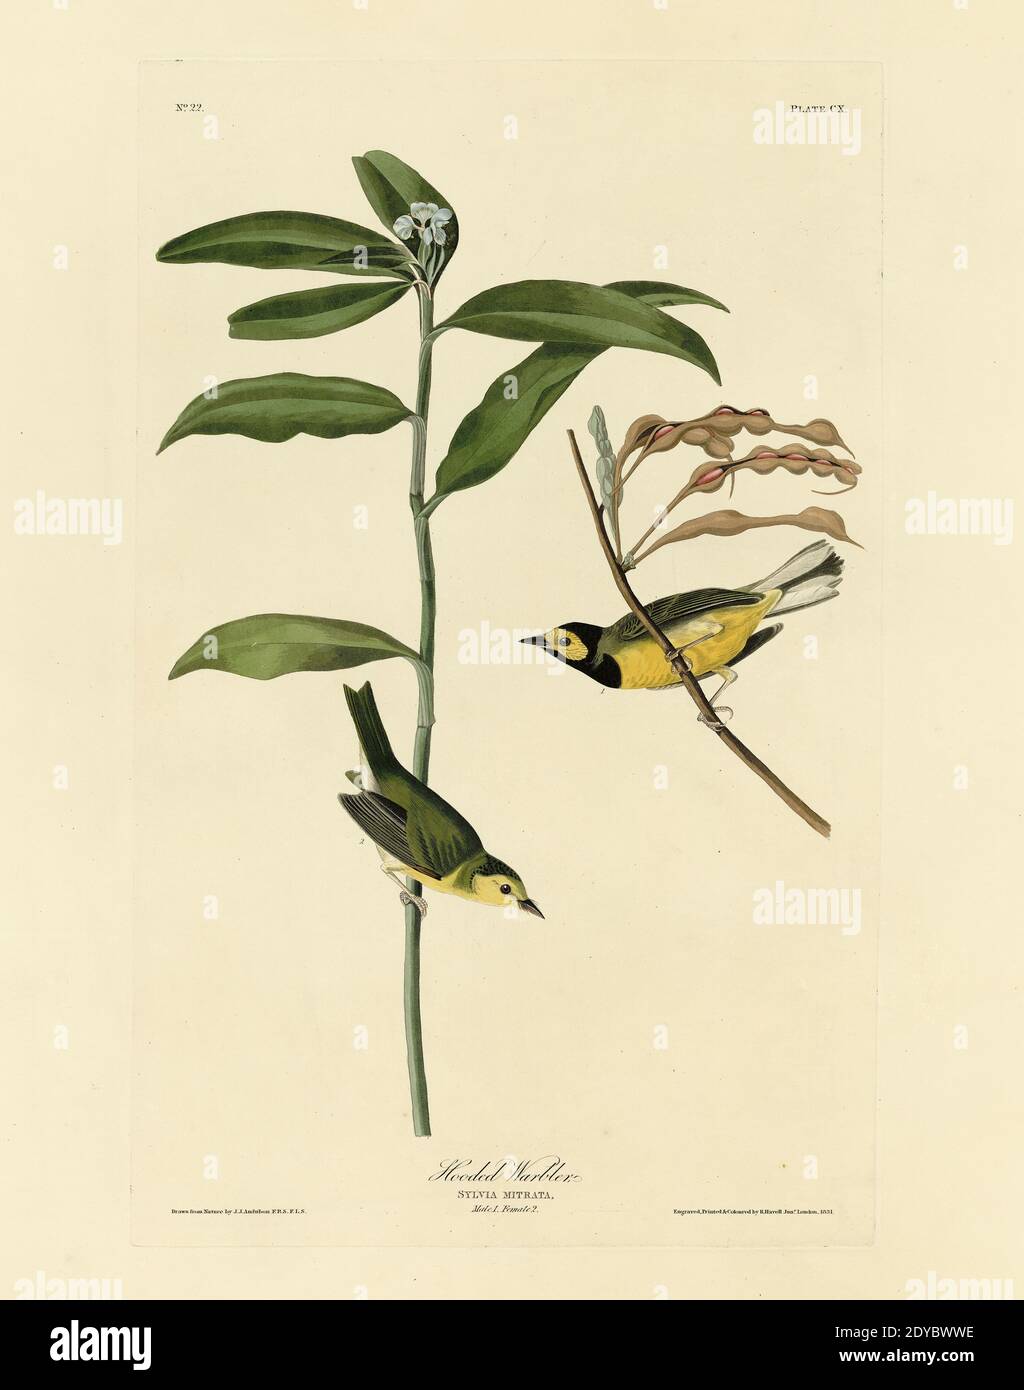 Plate 110 Hooded Warbler, from The Birds of America folio (1827–1839) by John James Audubon - Very high resolution and quality edited image Stock Photo